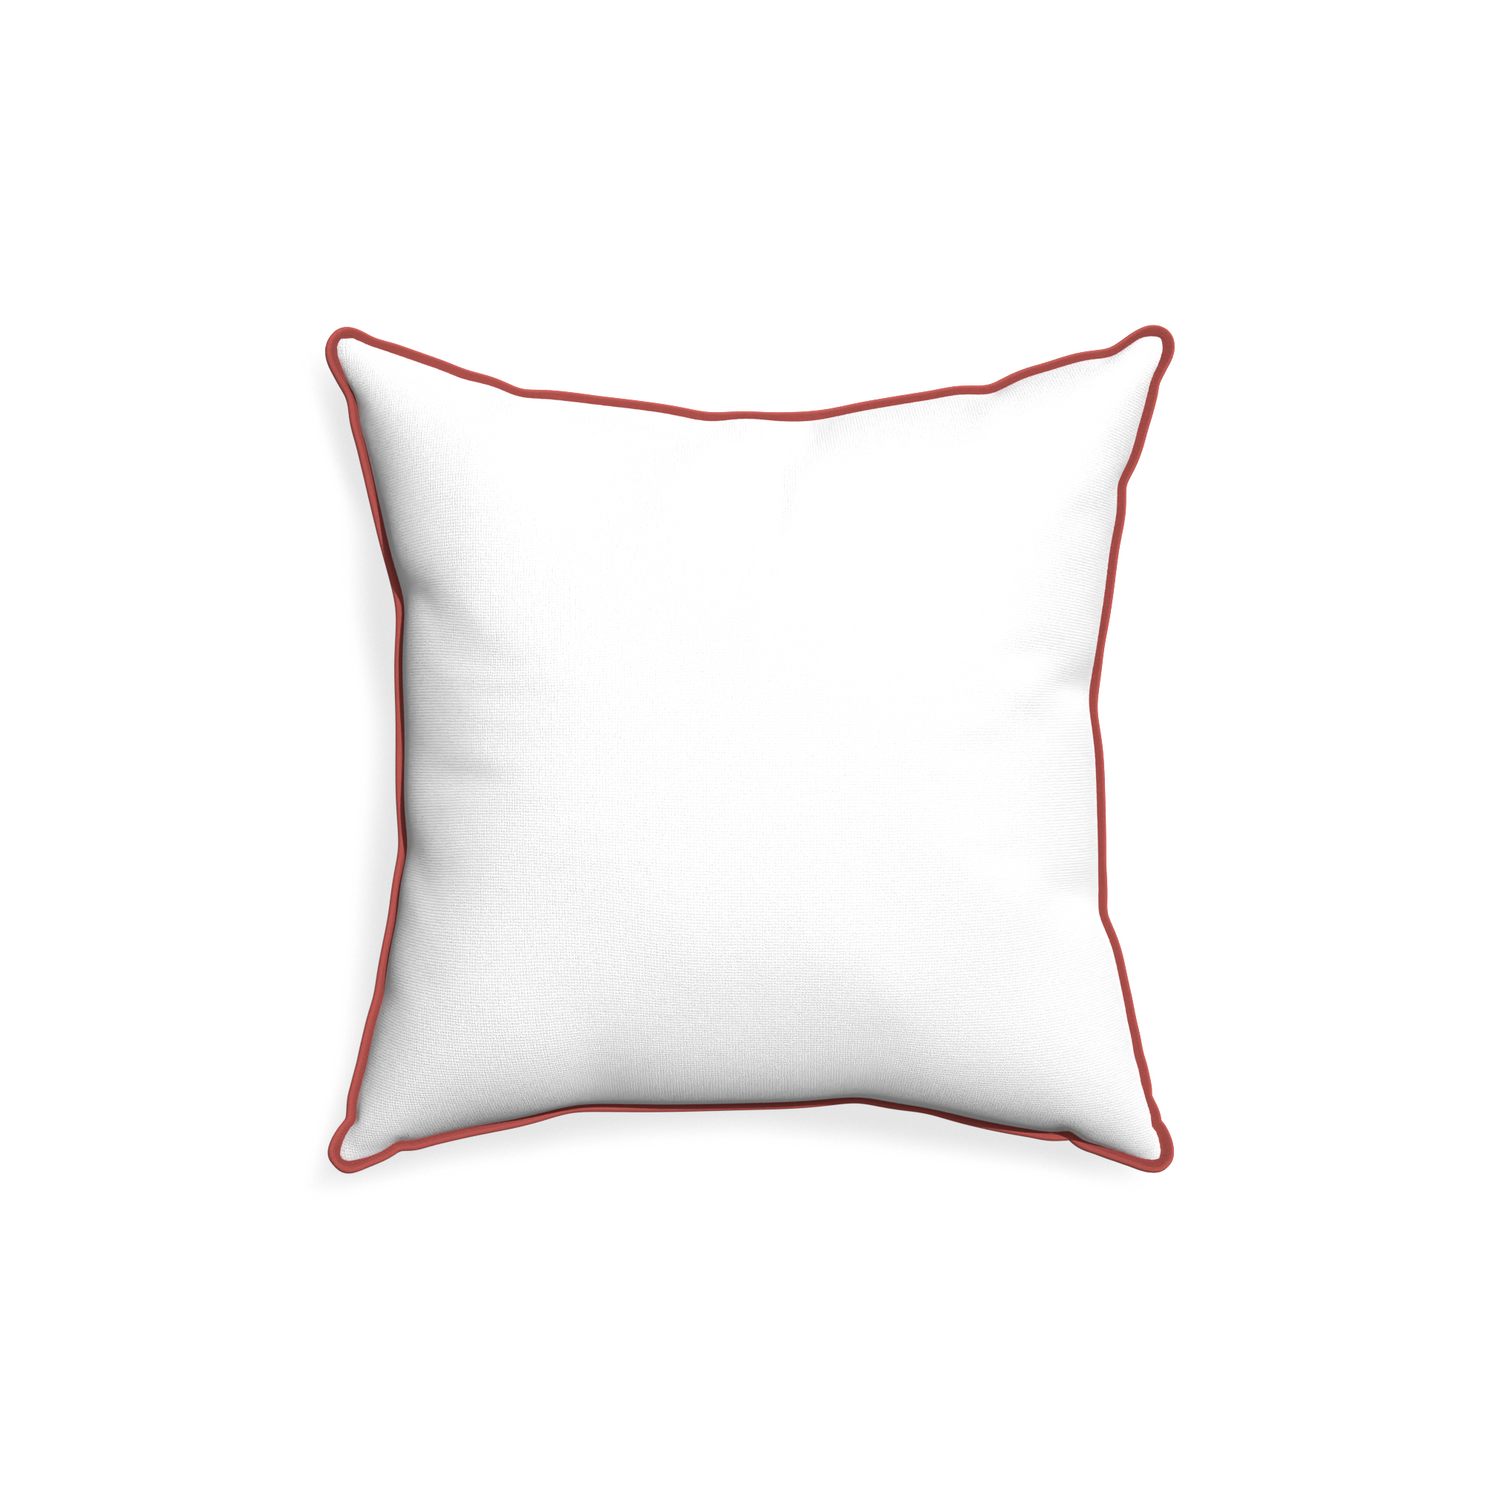 18-square snow custom pillow with c piping on white background